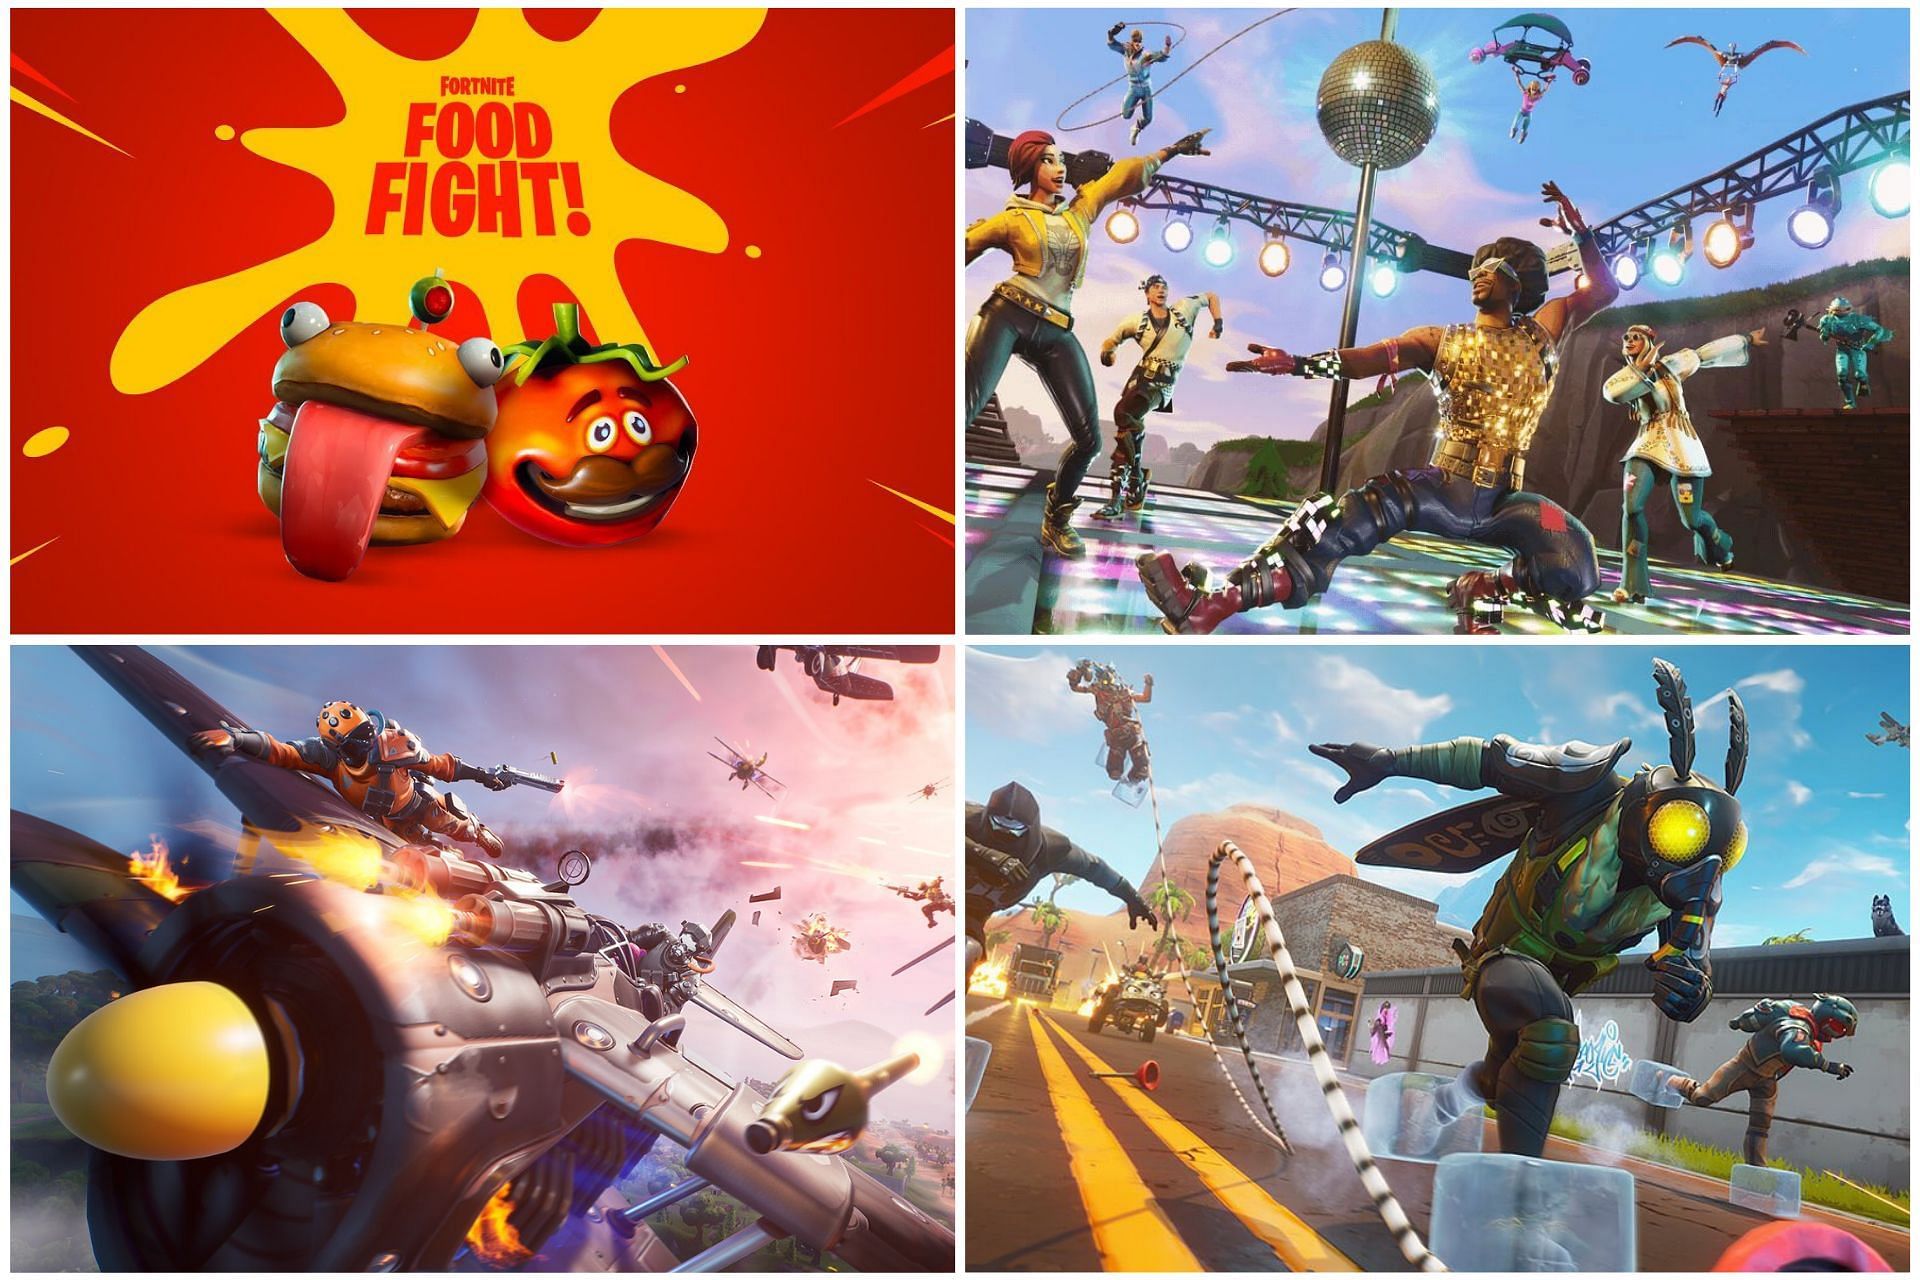 Some of the best LTMs in Fortnite history are Food Fight, Slide, Air Royale, and Floor is Lava (Image via Sportskeeda)